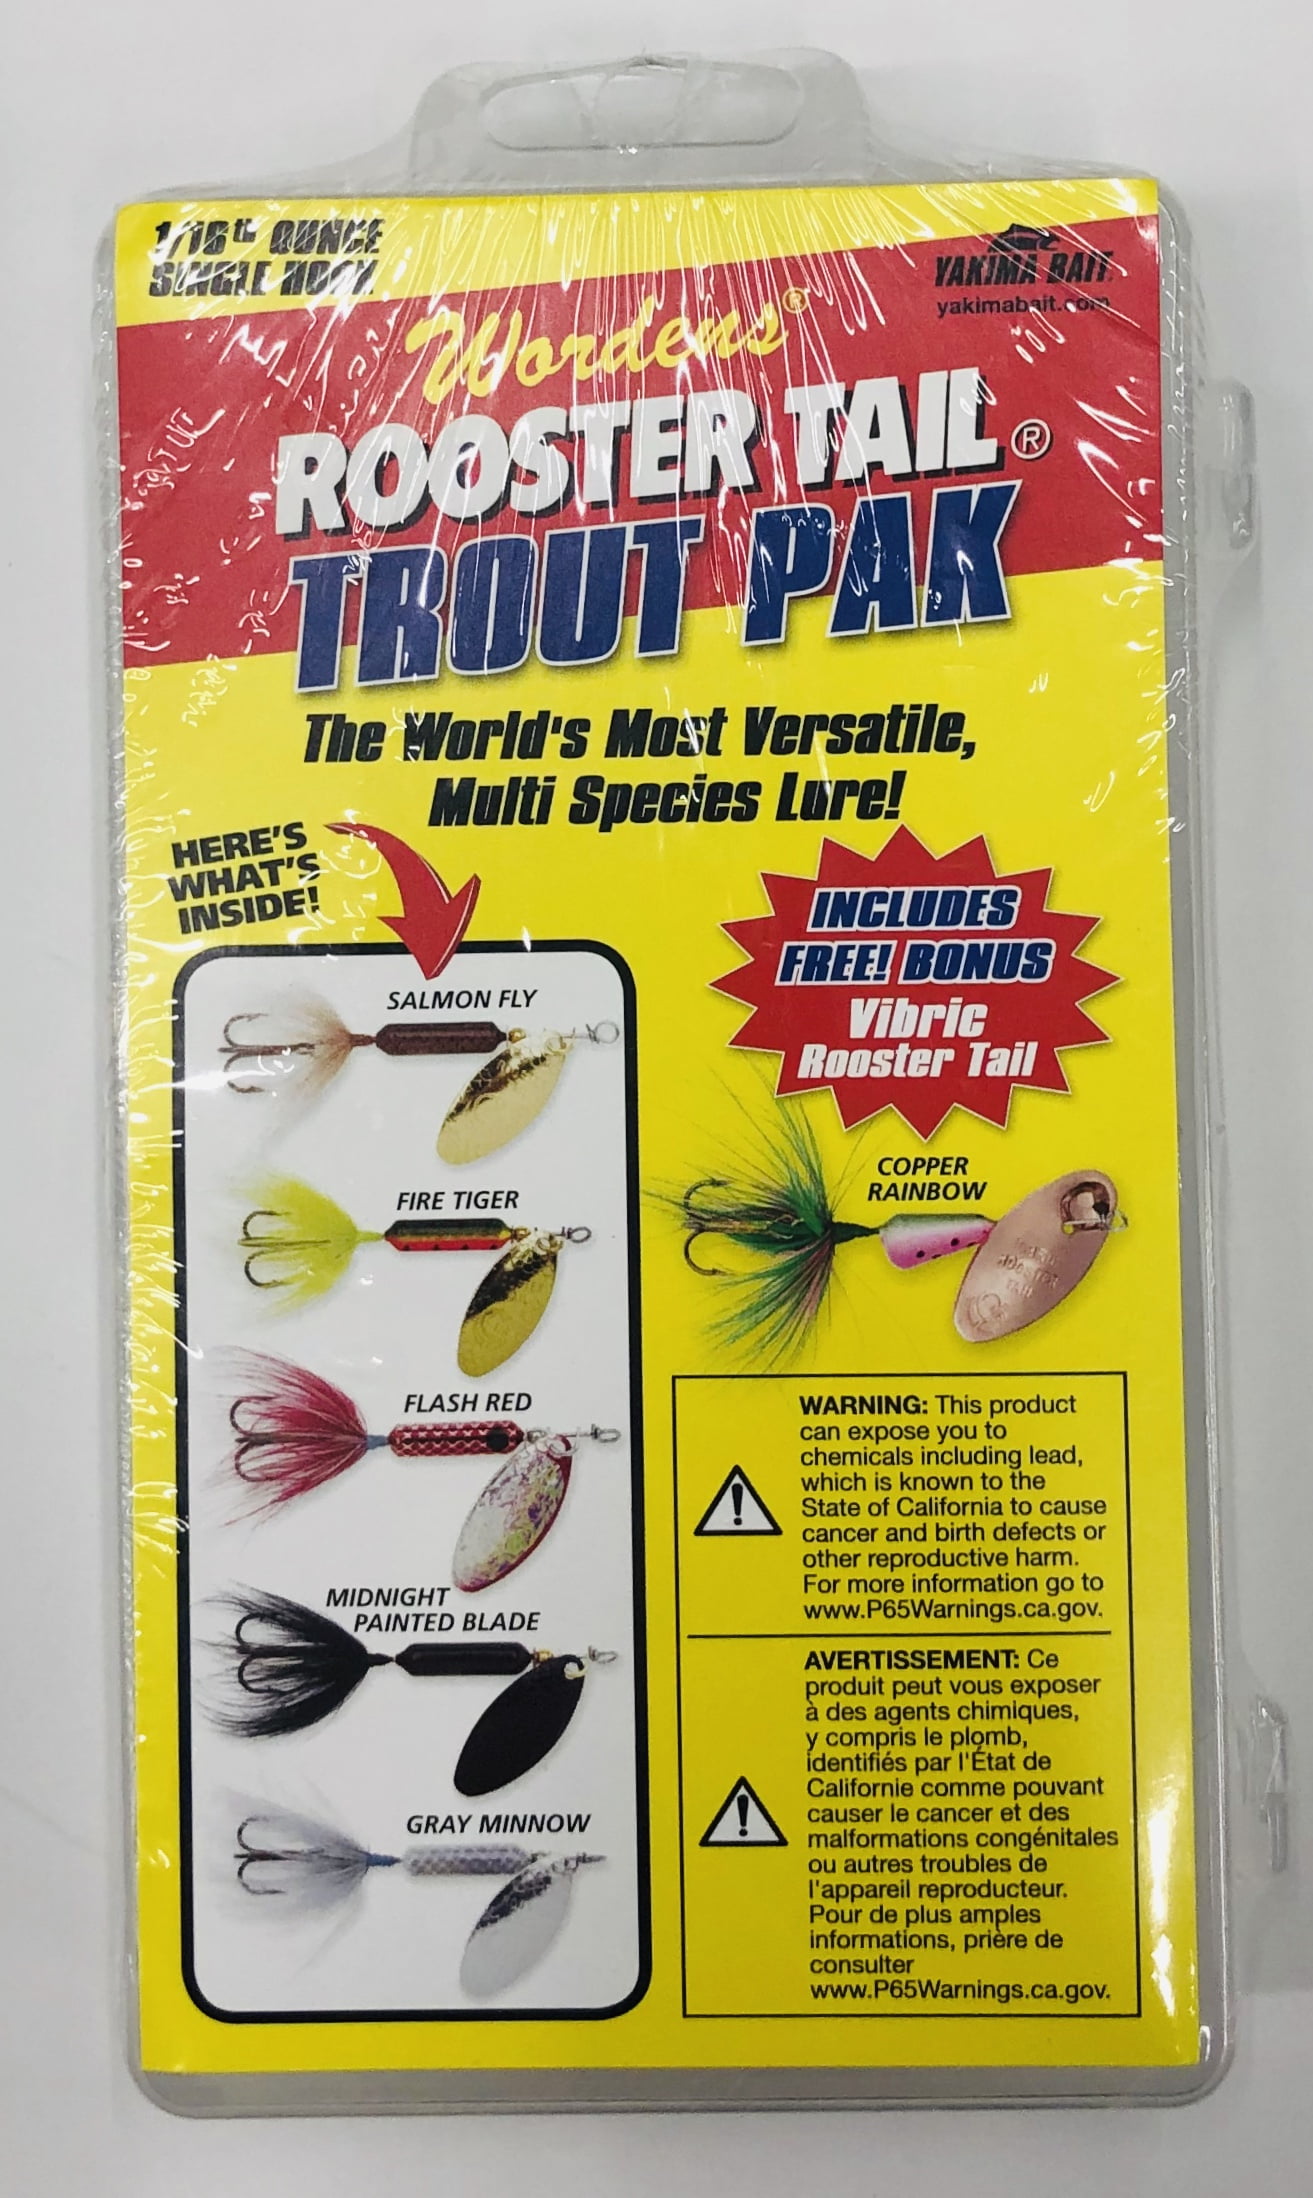 Vibric Rooster Tail®: 1/16 oz.